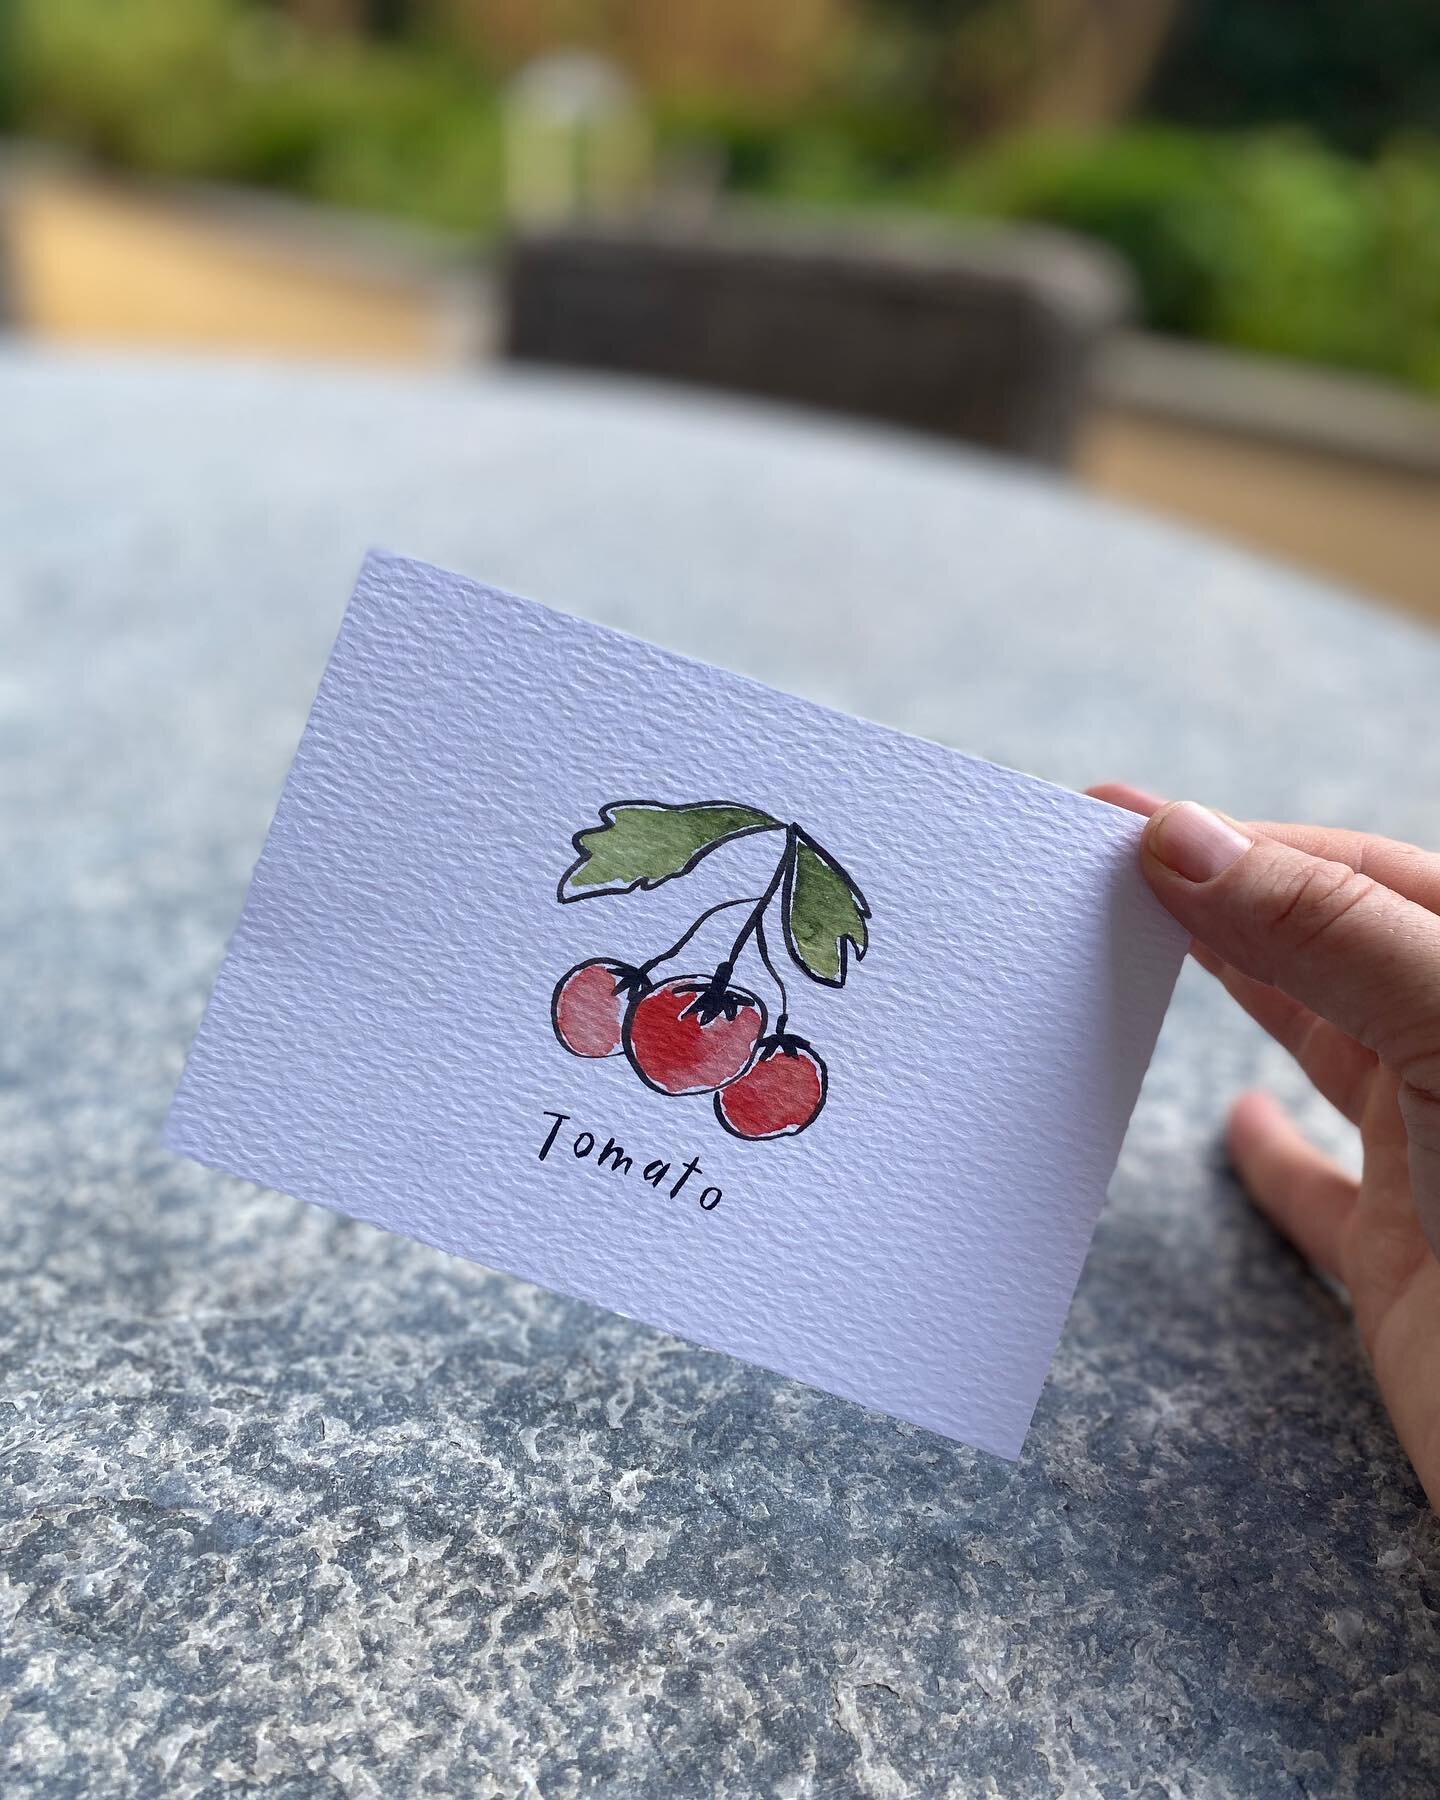 WORKING TOGETHER  we&rsquo;re so pleased to announce we&rsquo;ve enlisted the help of the insanely talented @inkthimble to paint us bespoke picture of fruit and vegetables for our new postcard notes, just for the #Tidy Kitchen. Want to order somethin